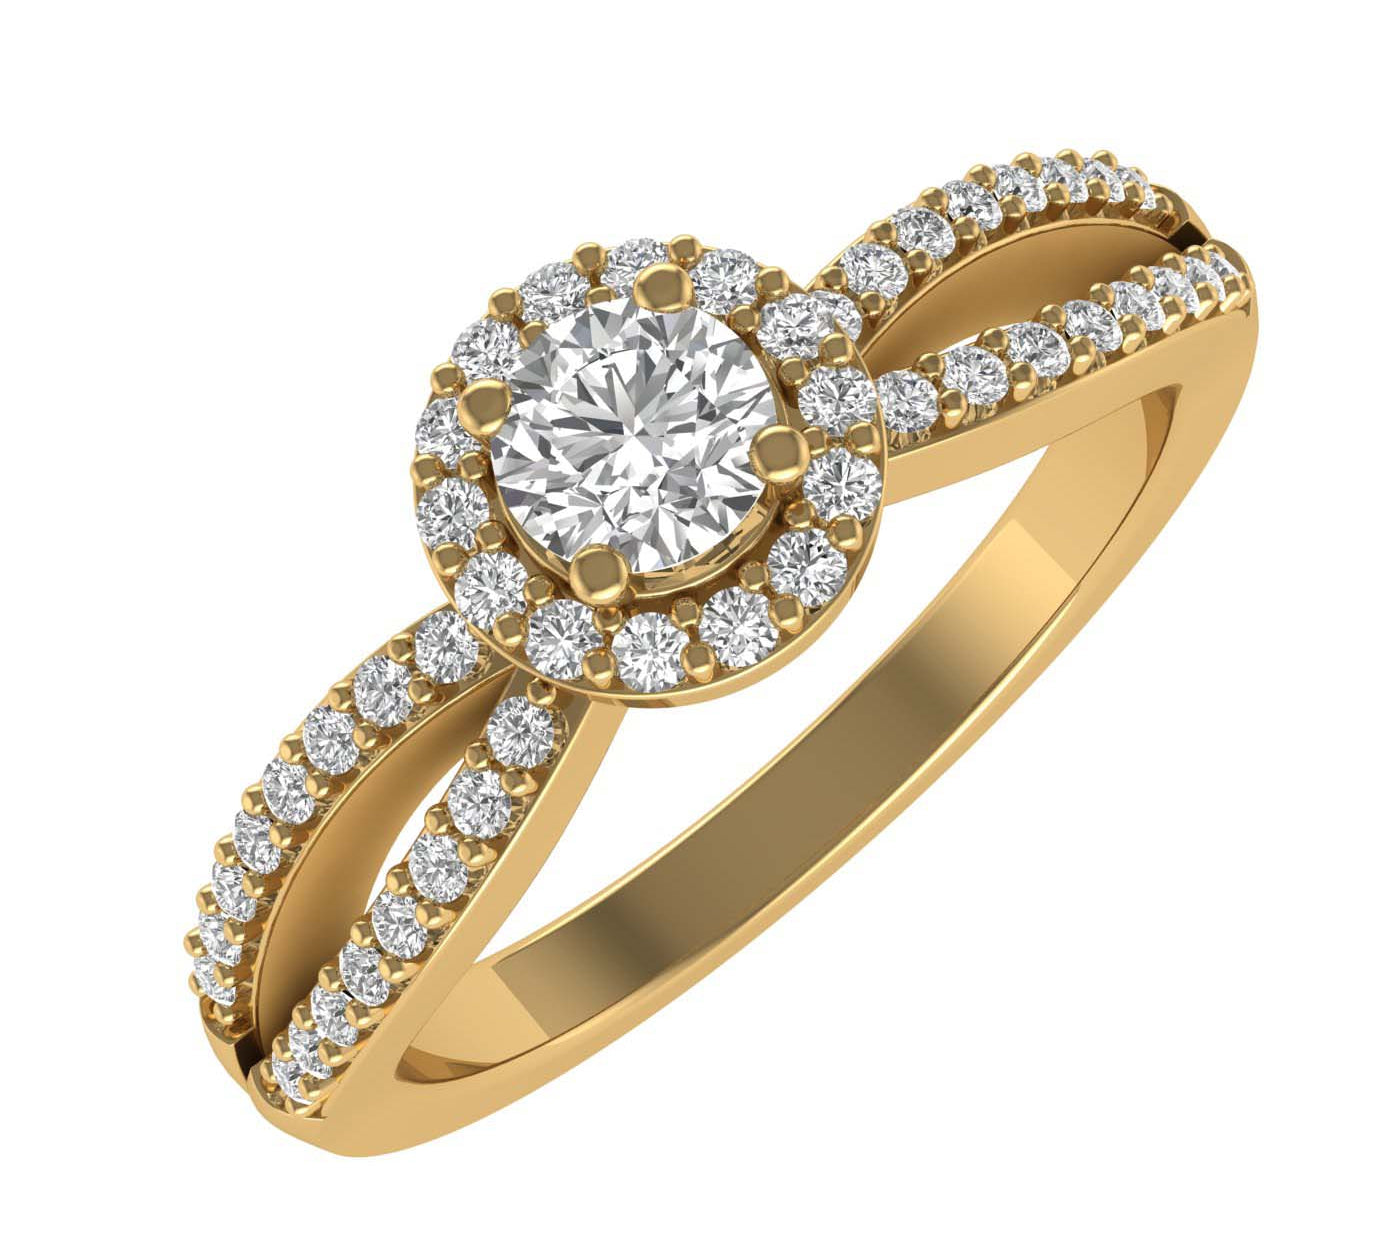 Gold Halo Diamond Infinity Love Solitaire Engagement Ring (0.40 Carat) - IGI Certified